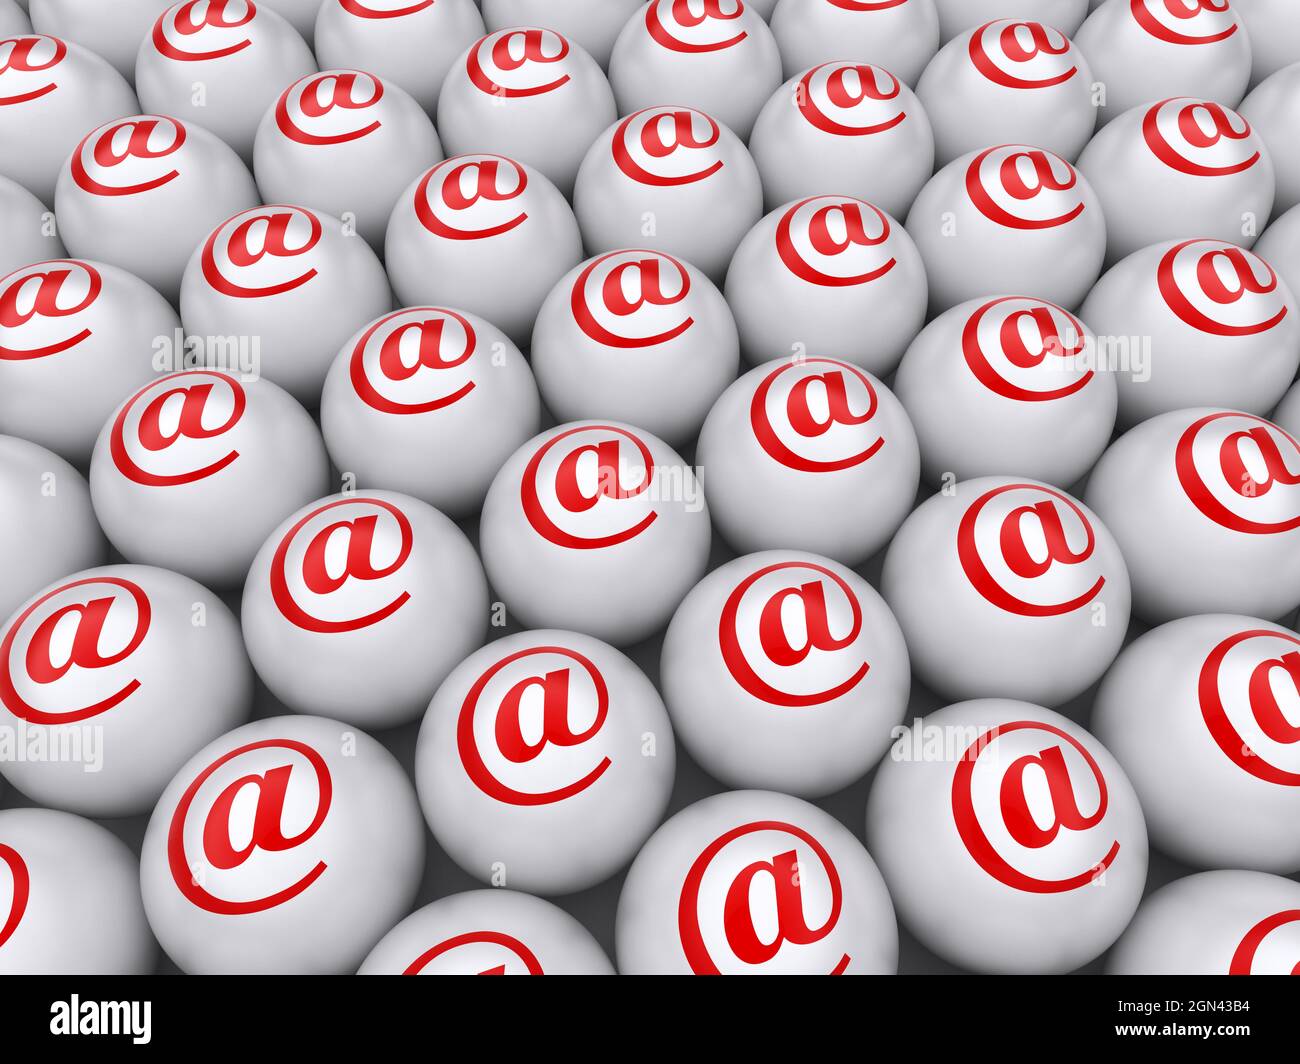 E-mail abstract background. 3d rendered image Stock Photo